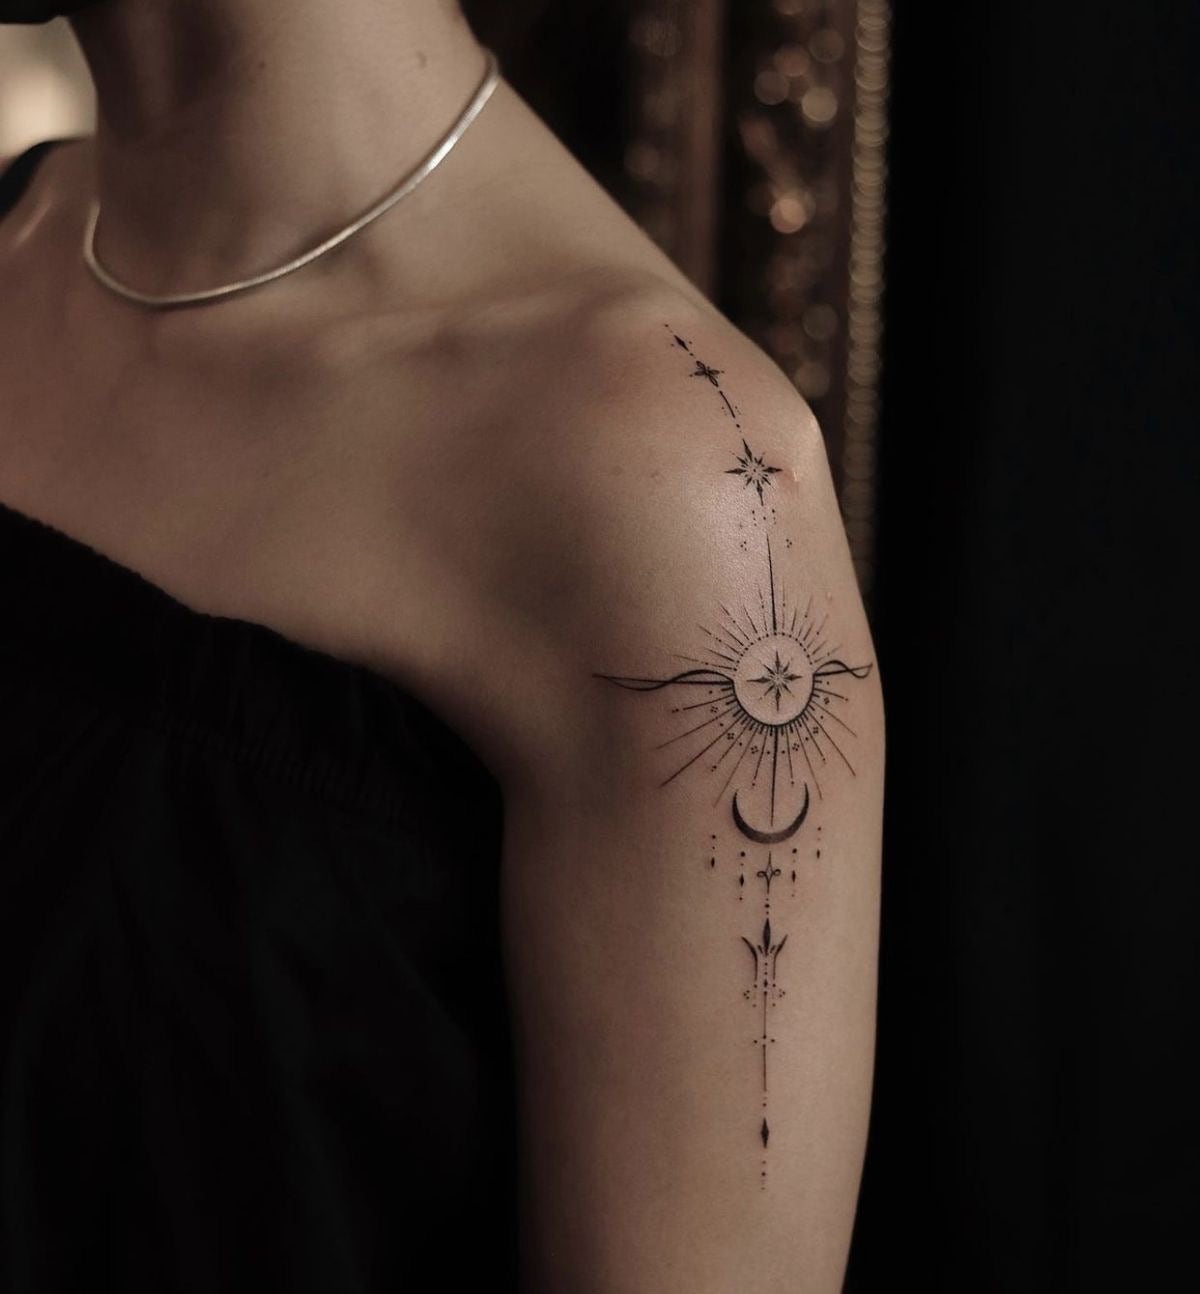 10 Best moon phases tattoo designs